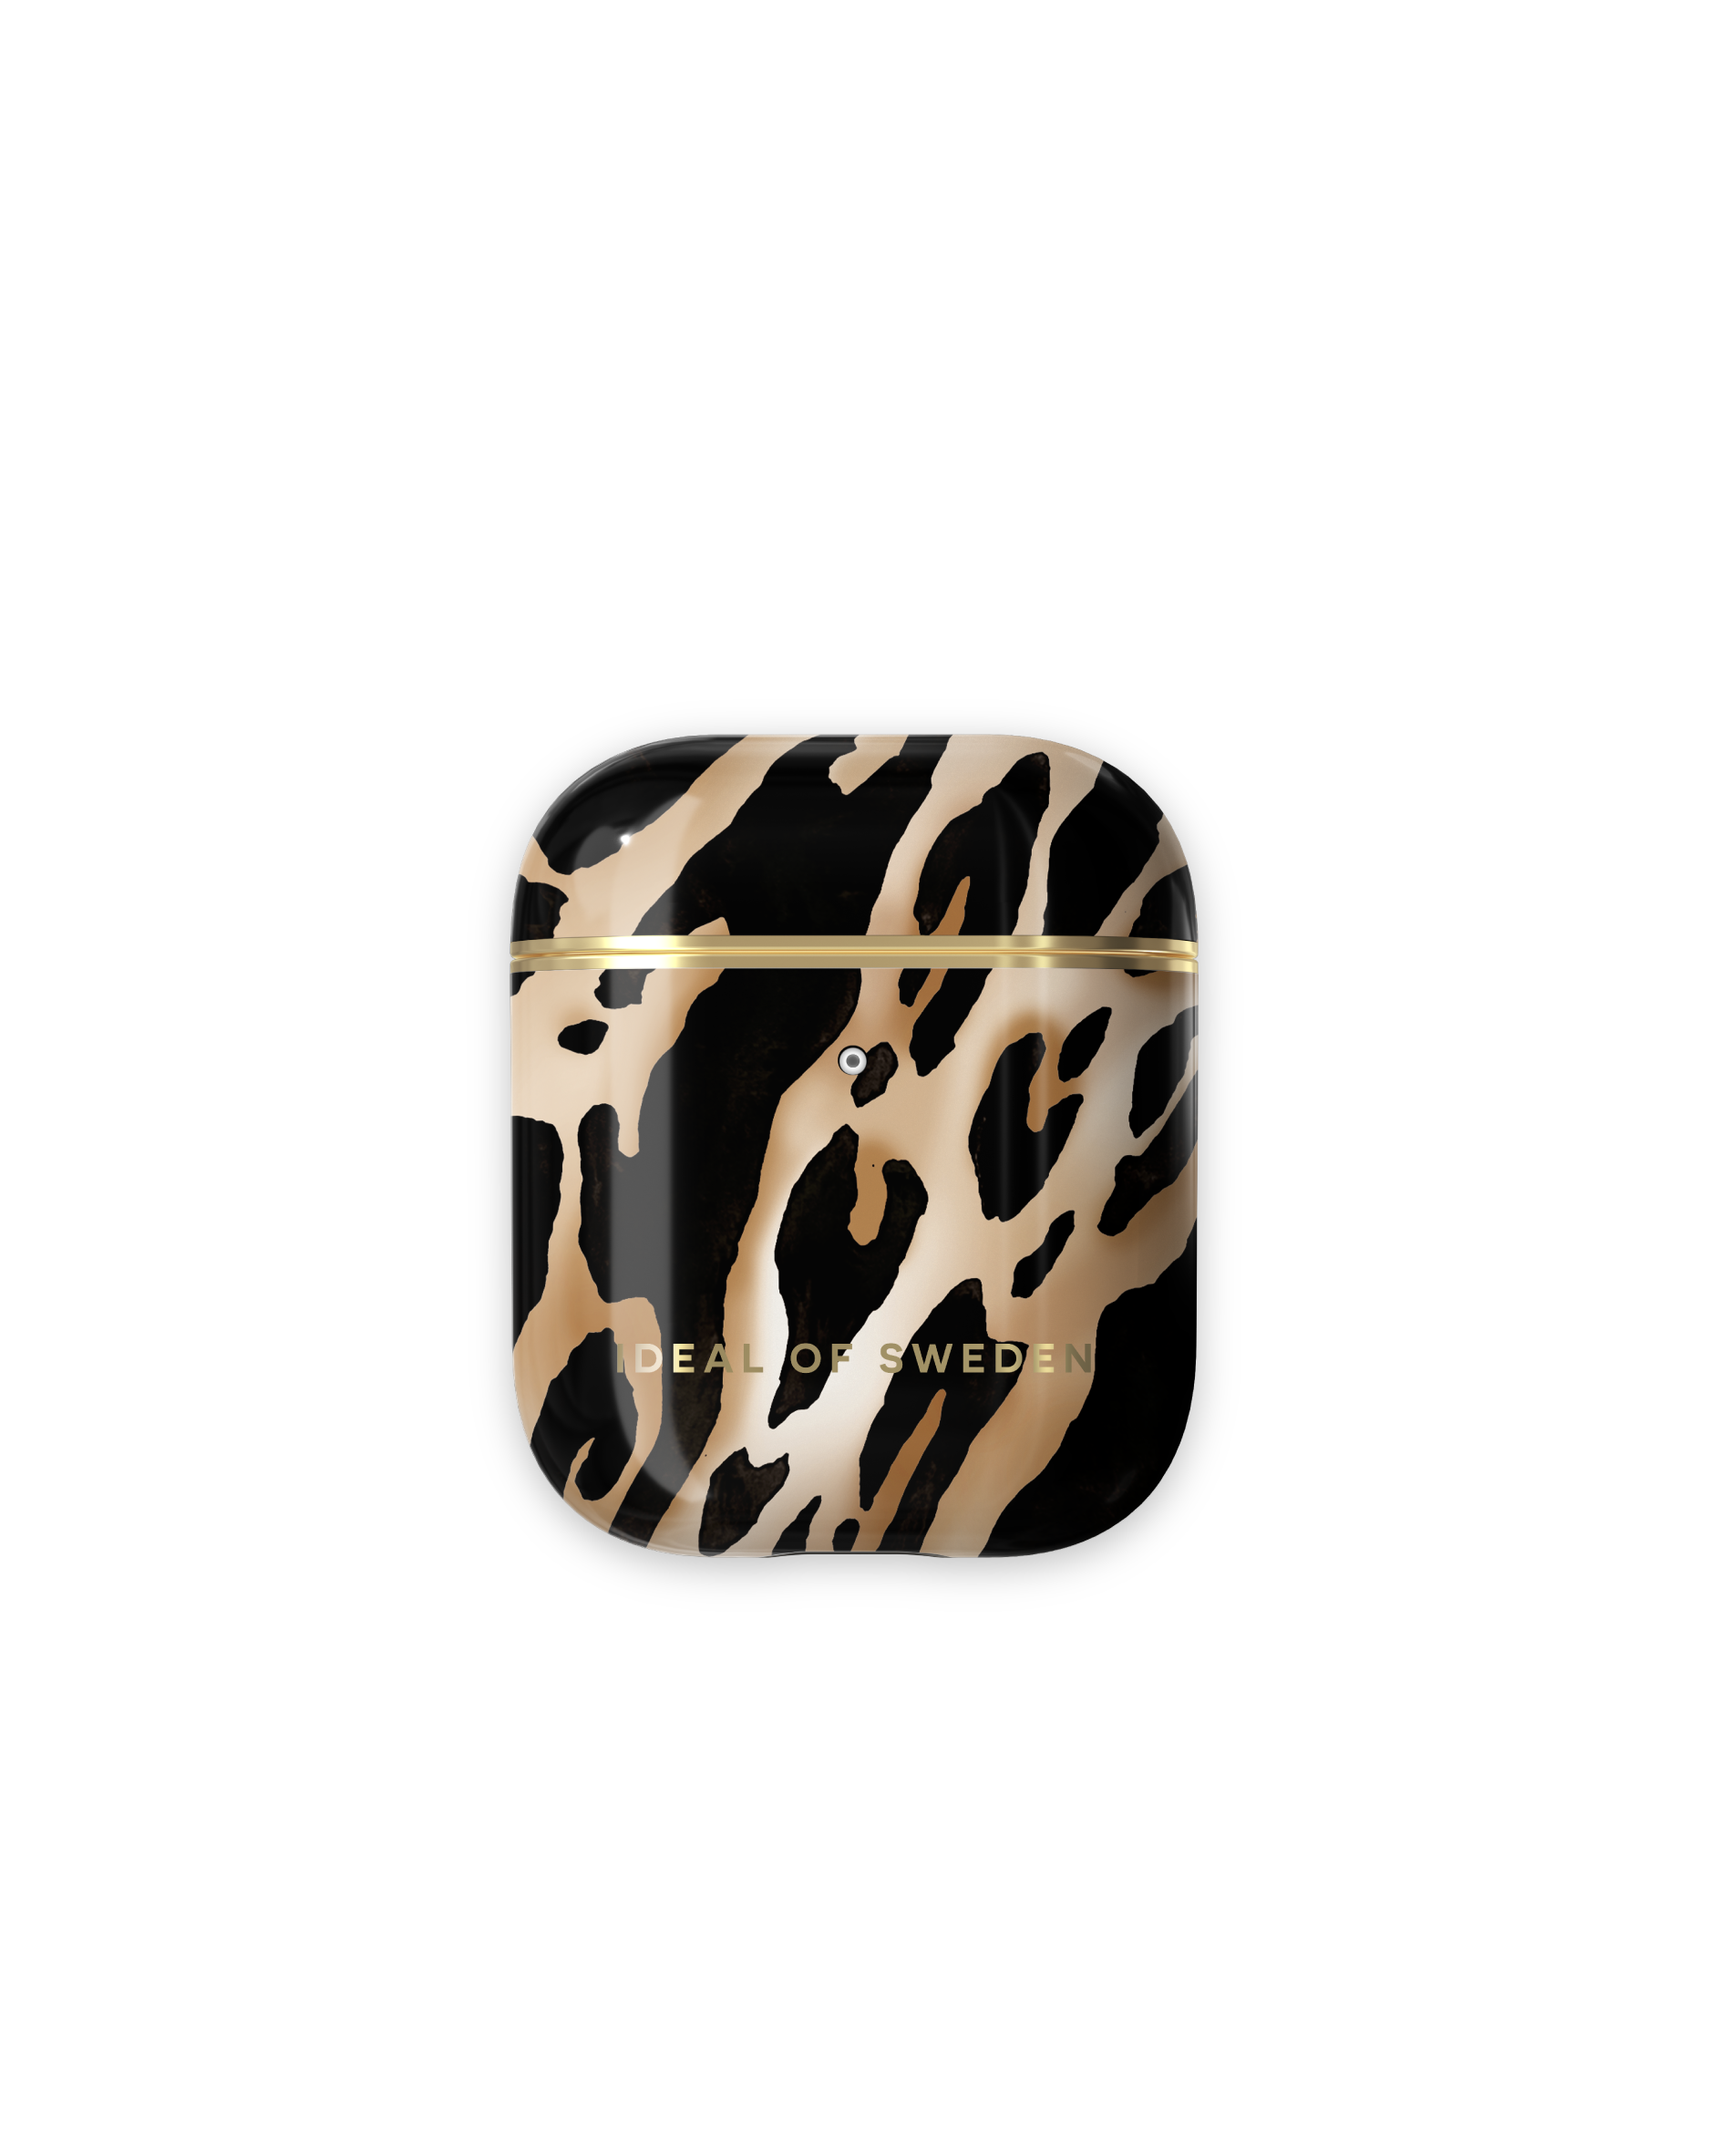 Cover passend OF IDEAL Iconic AirPod für: IDFAPCAW21-356 Full Case Leopard SWEDEN Apple